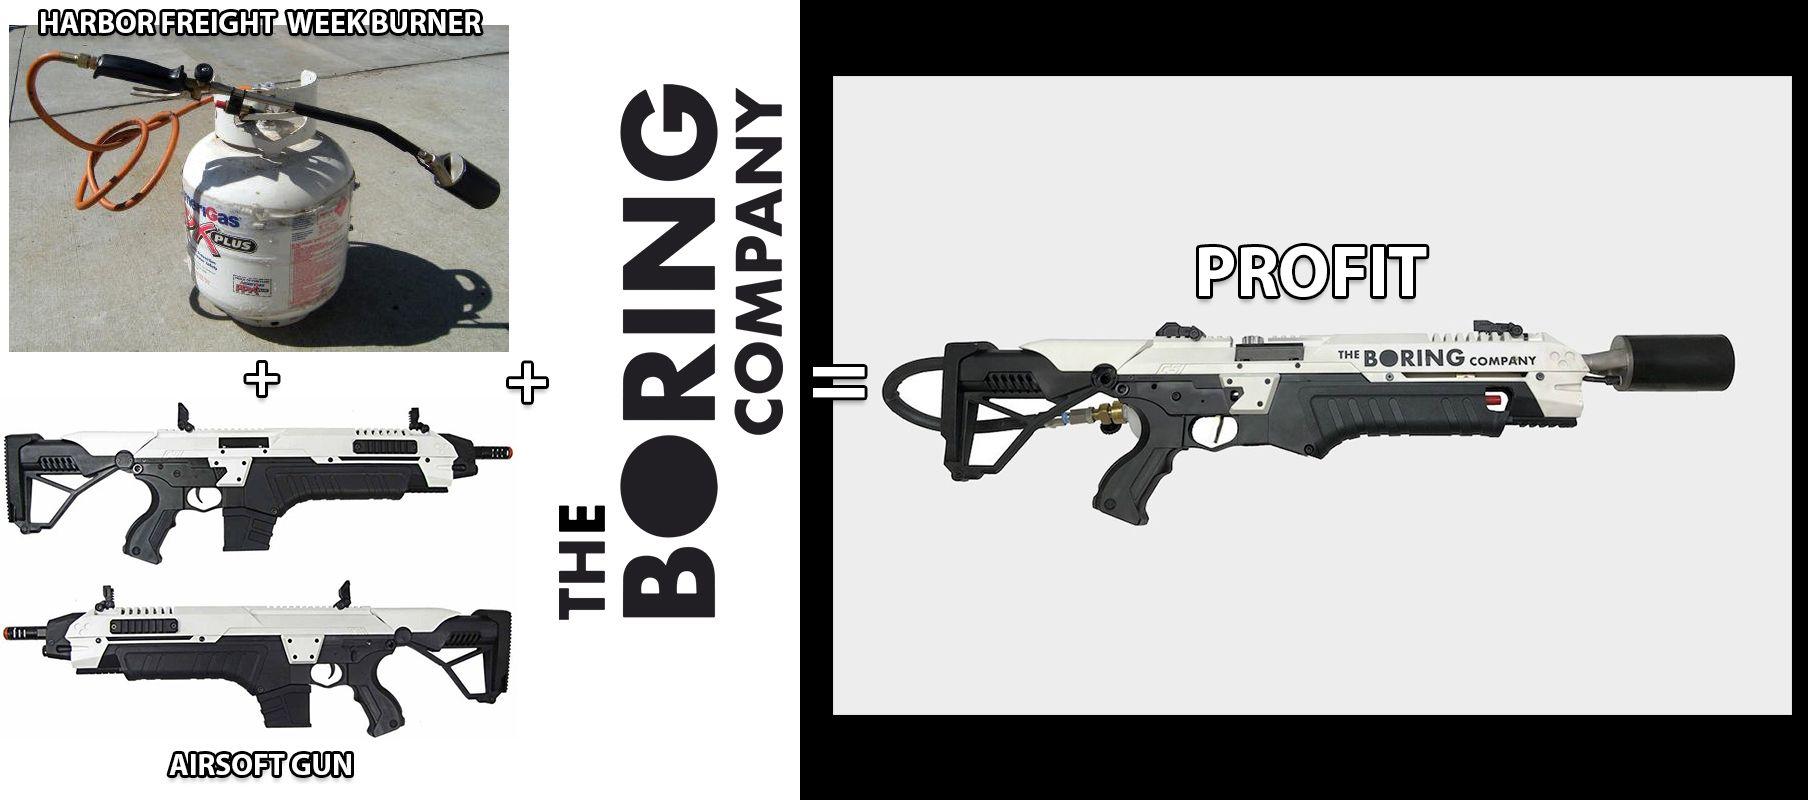 The Boring Company Flamethrower Logo - Boring Company Flame Thrower Explained: Harbor Freight Week Burner + ...